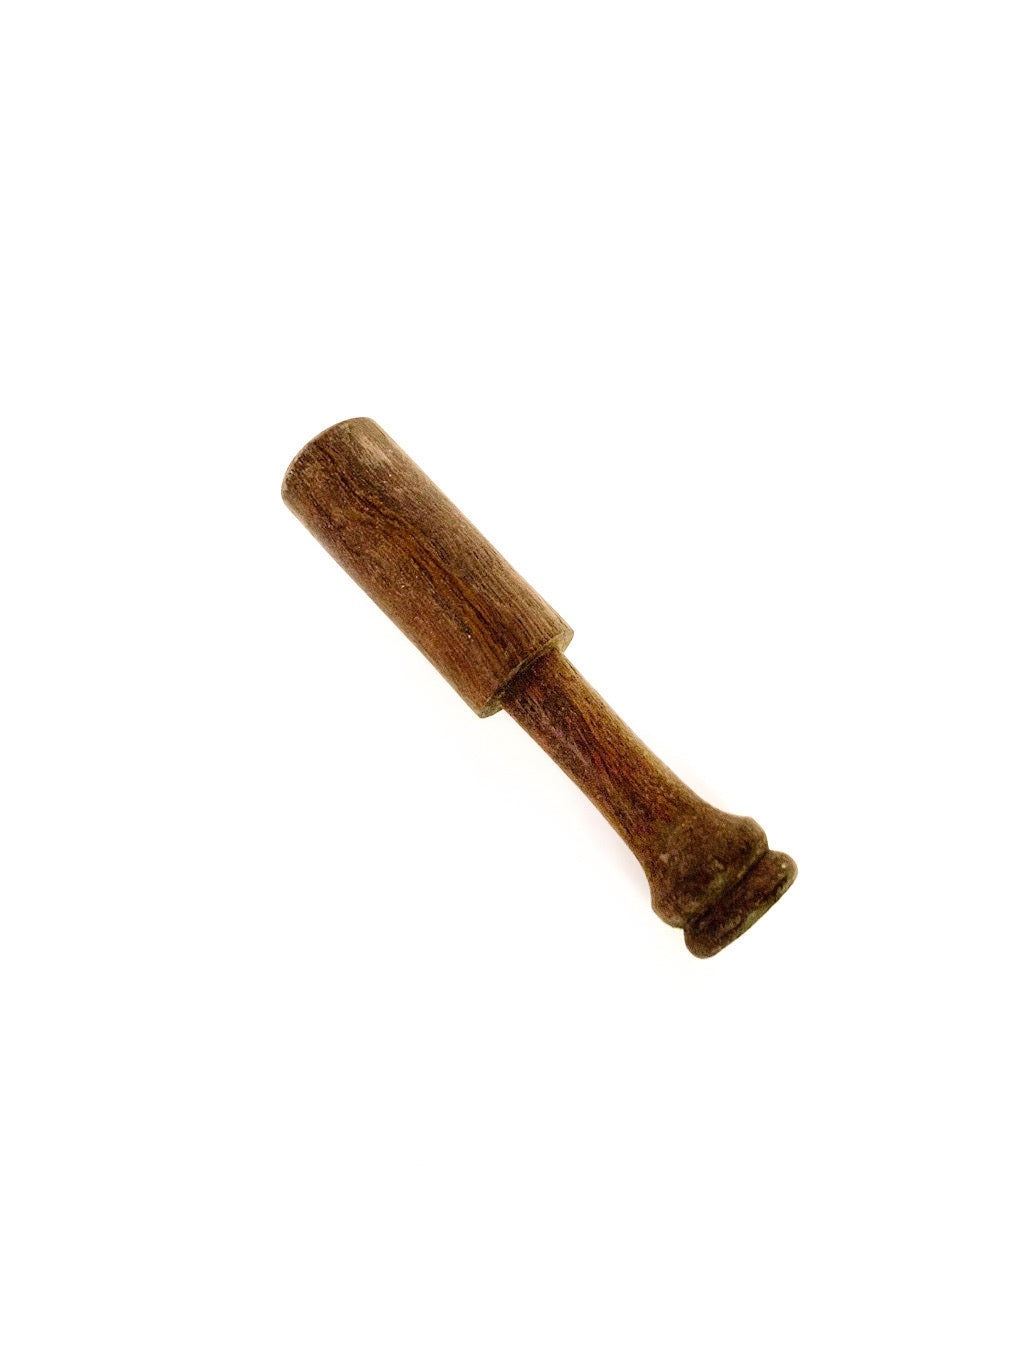 Singing bowl stick wooden - small